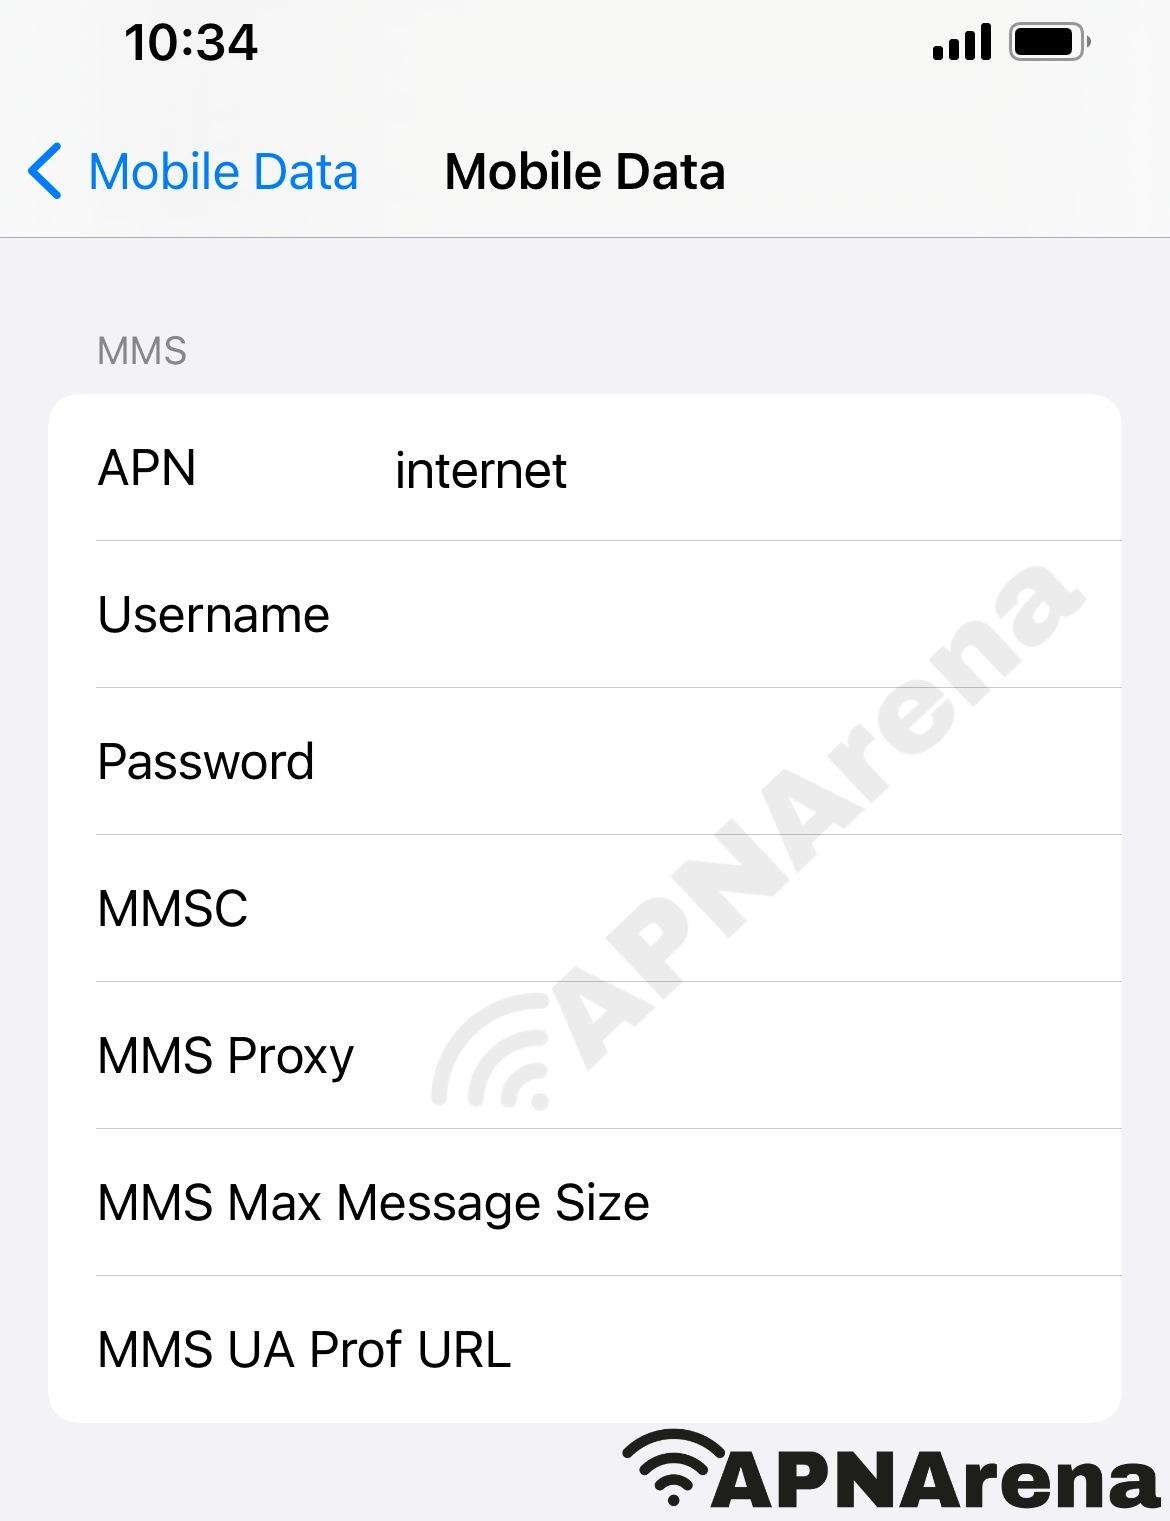 SoftBank Corp. & Y!Mobile MMS Settings for iPhone